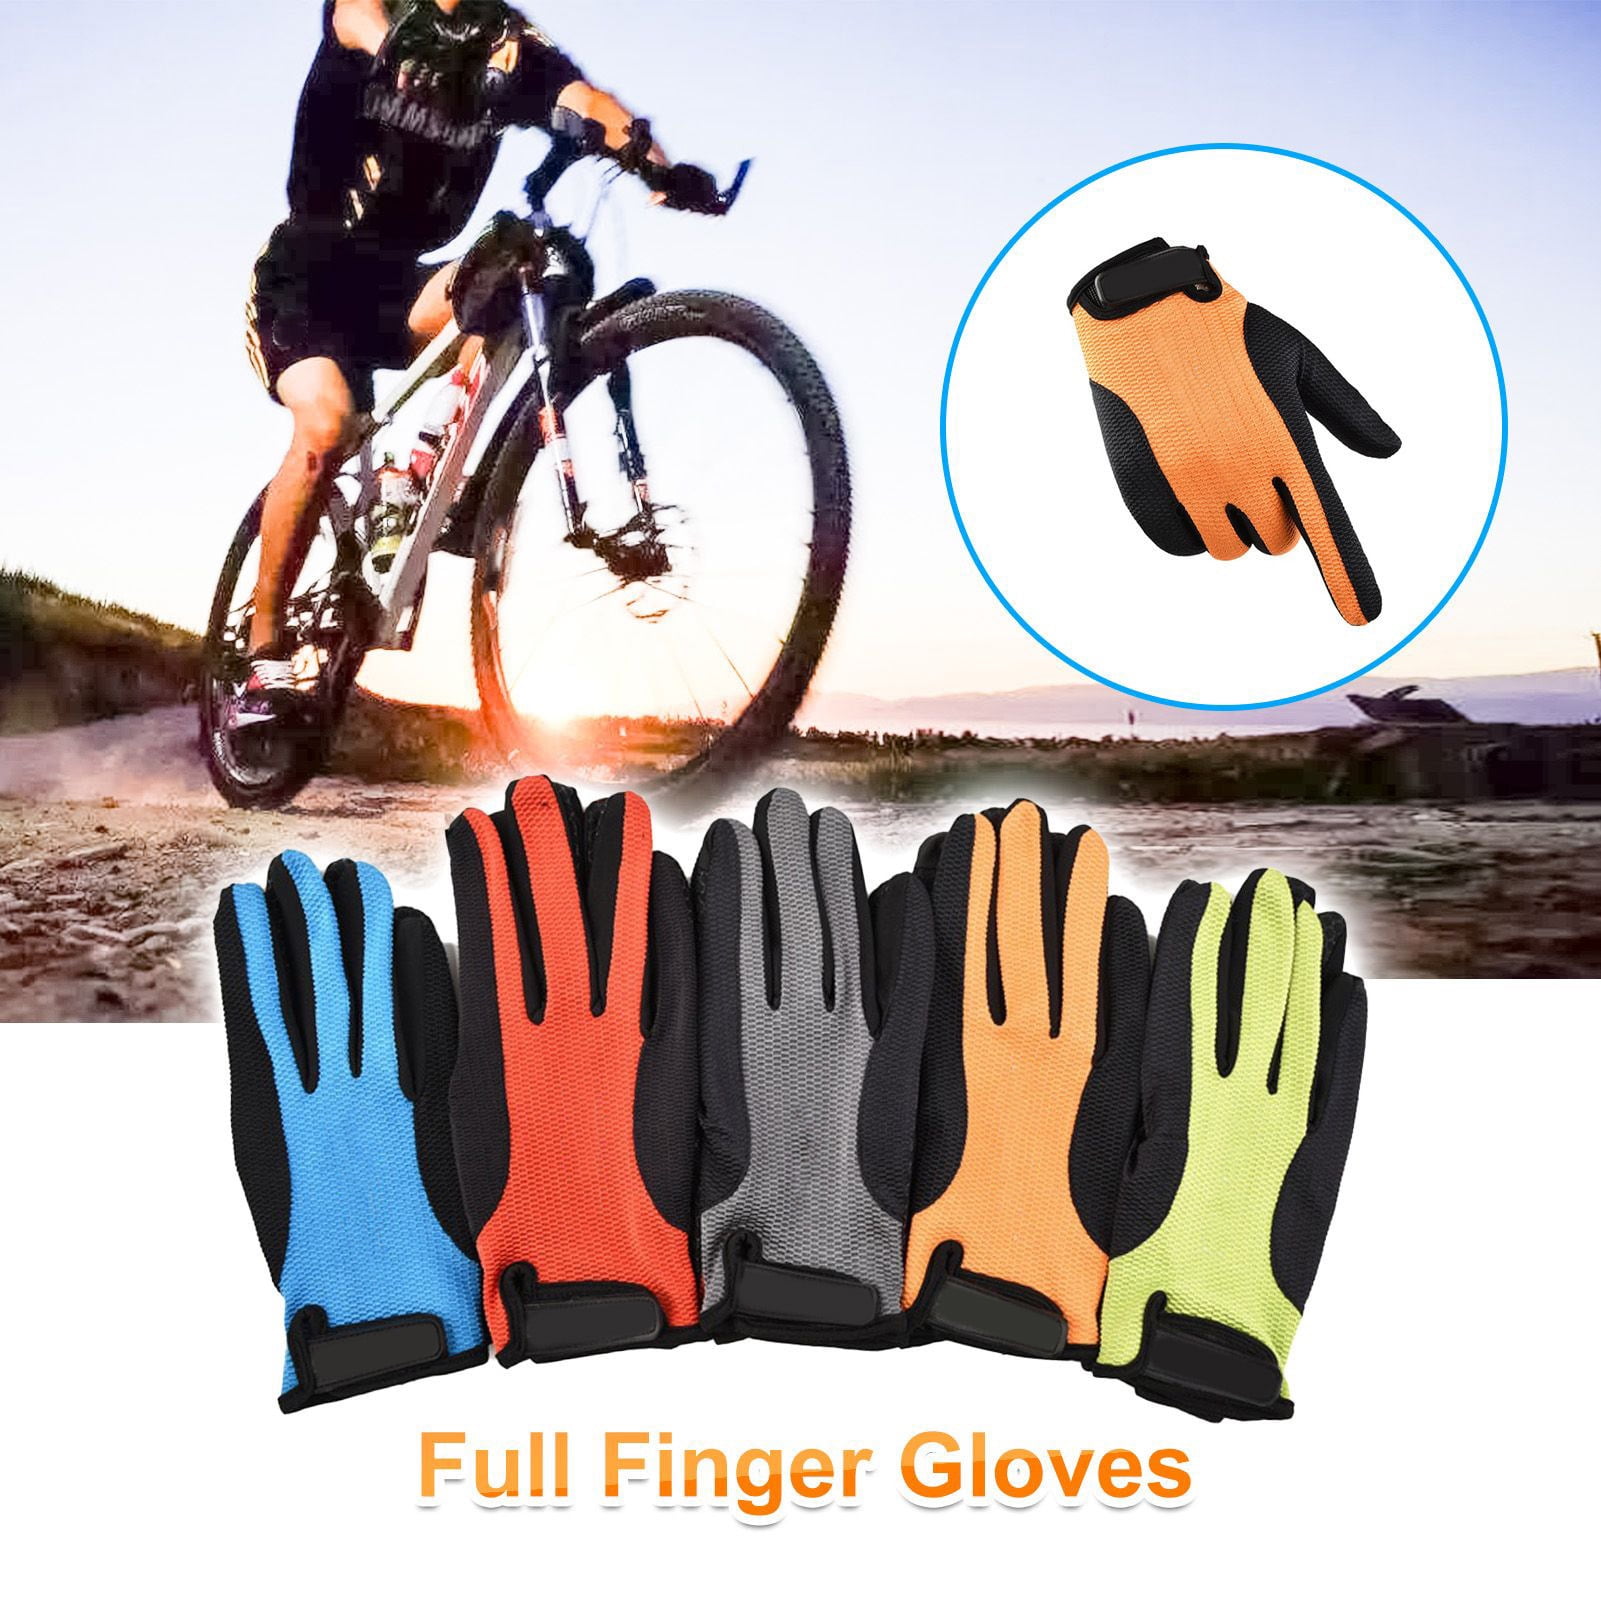 Full Finger Gloves,1 Pair Ice Silk Gloves Summer Breathable Comfortable Unisex Outdoor Sports Touch Screen Climbing Fitness Bicycling Gloves for Weight Lifting Exercise Black M 